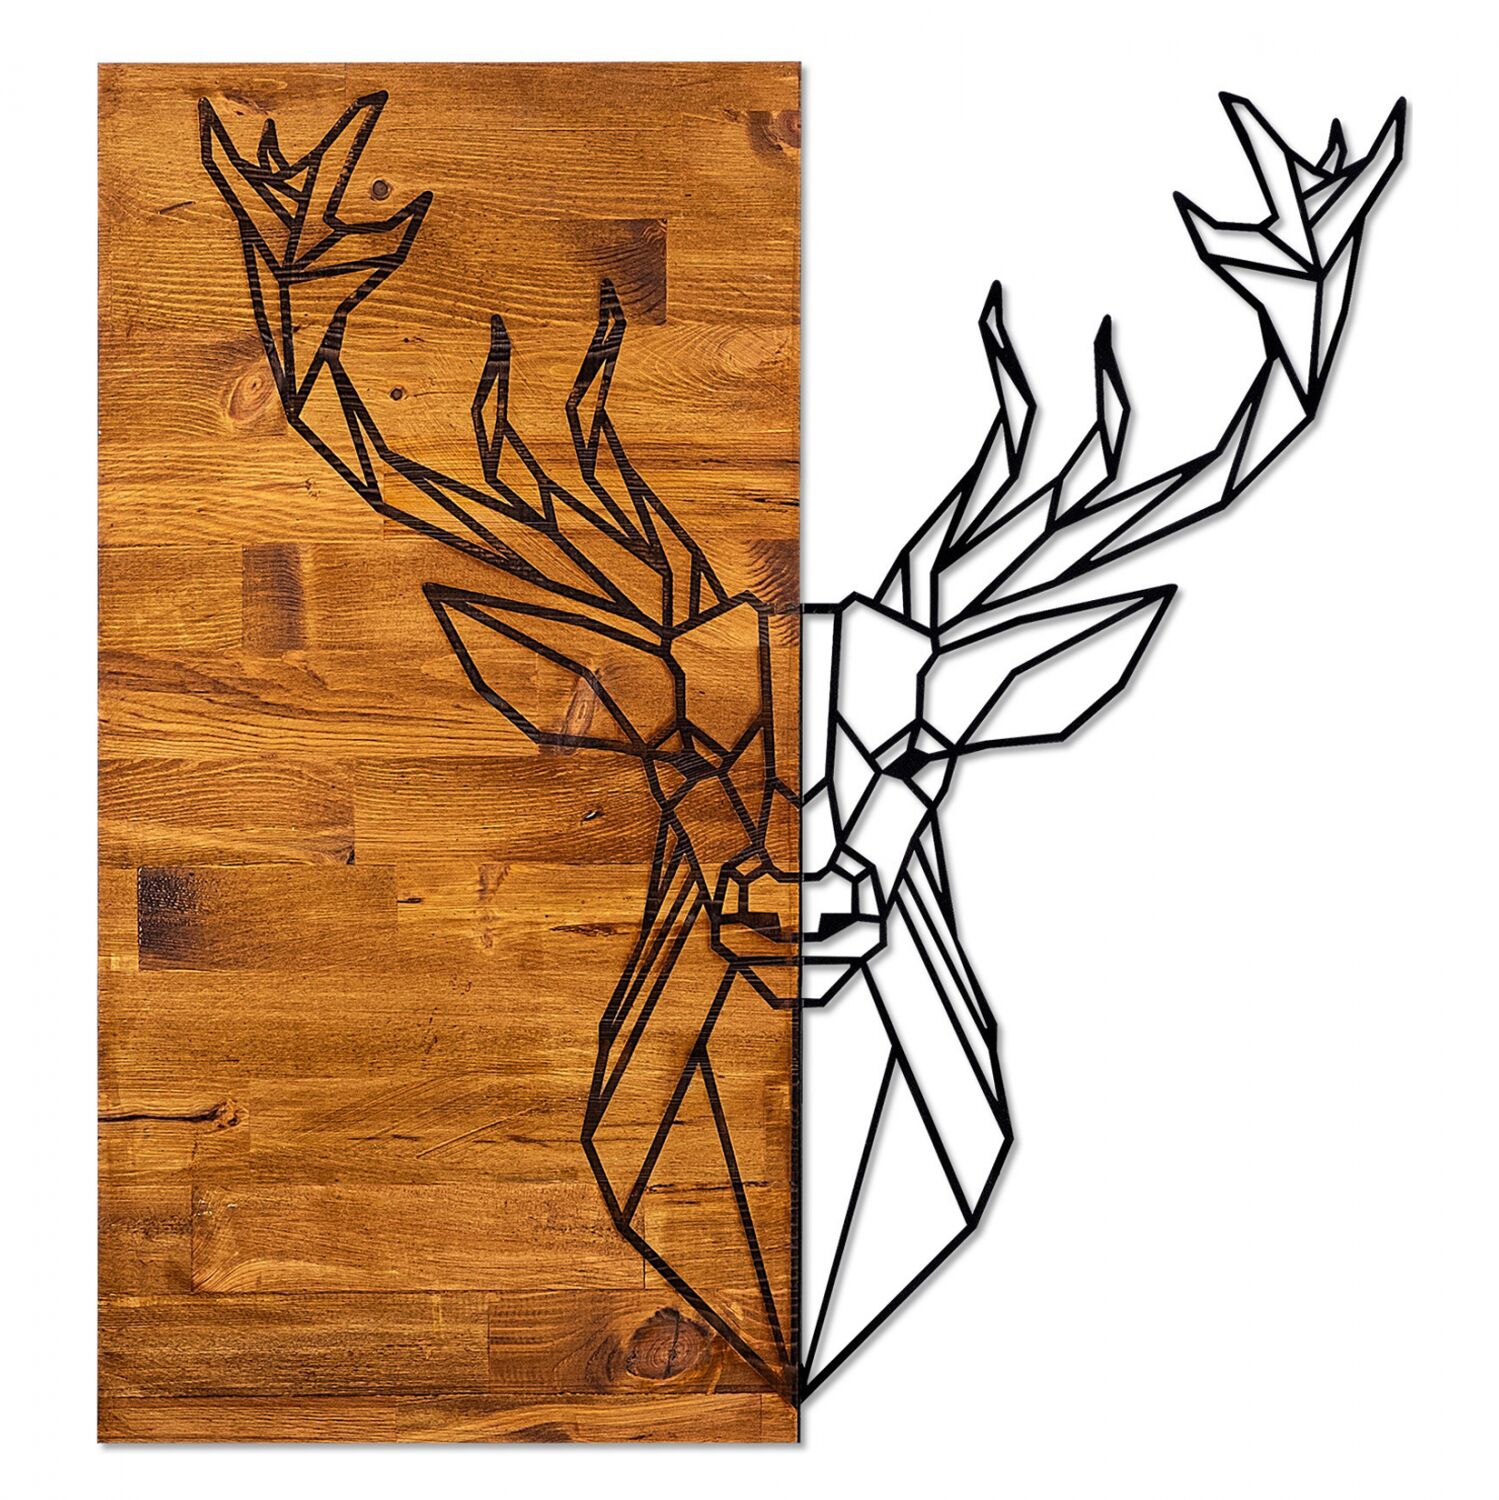 WOODEN WALL DECORATION WITH METAL REINDEΕR HM7332 56Χ3Χ58 cm.